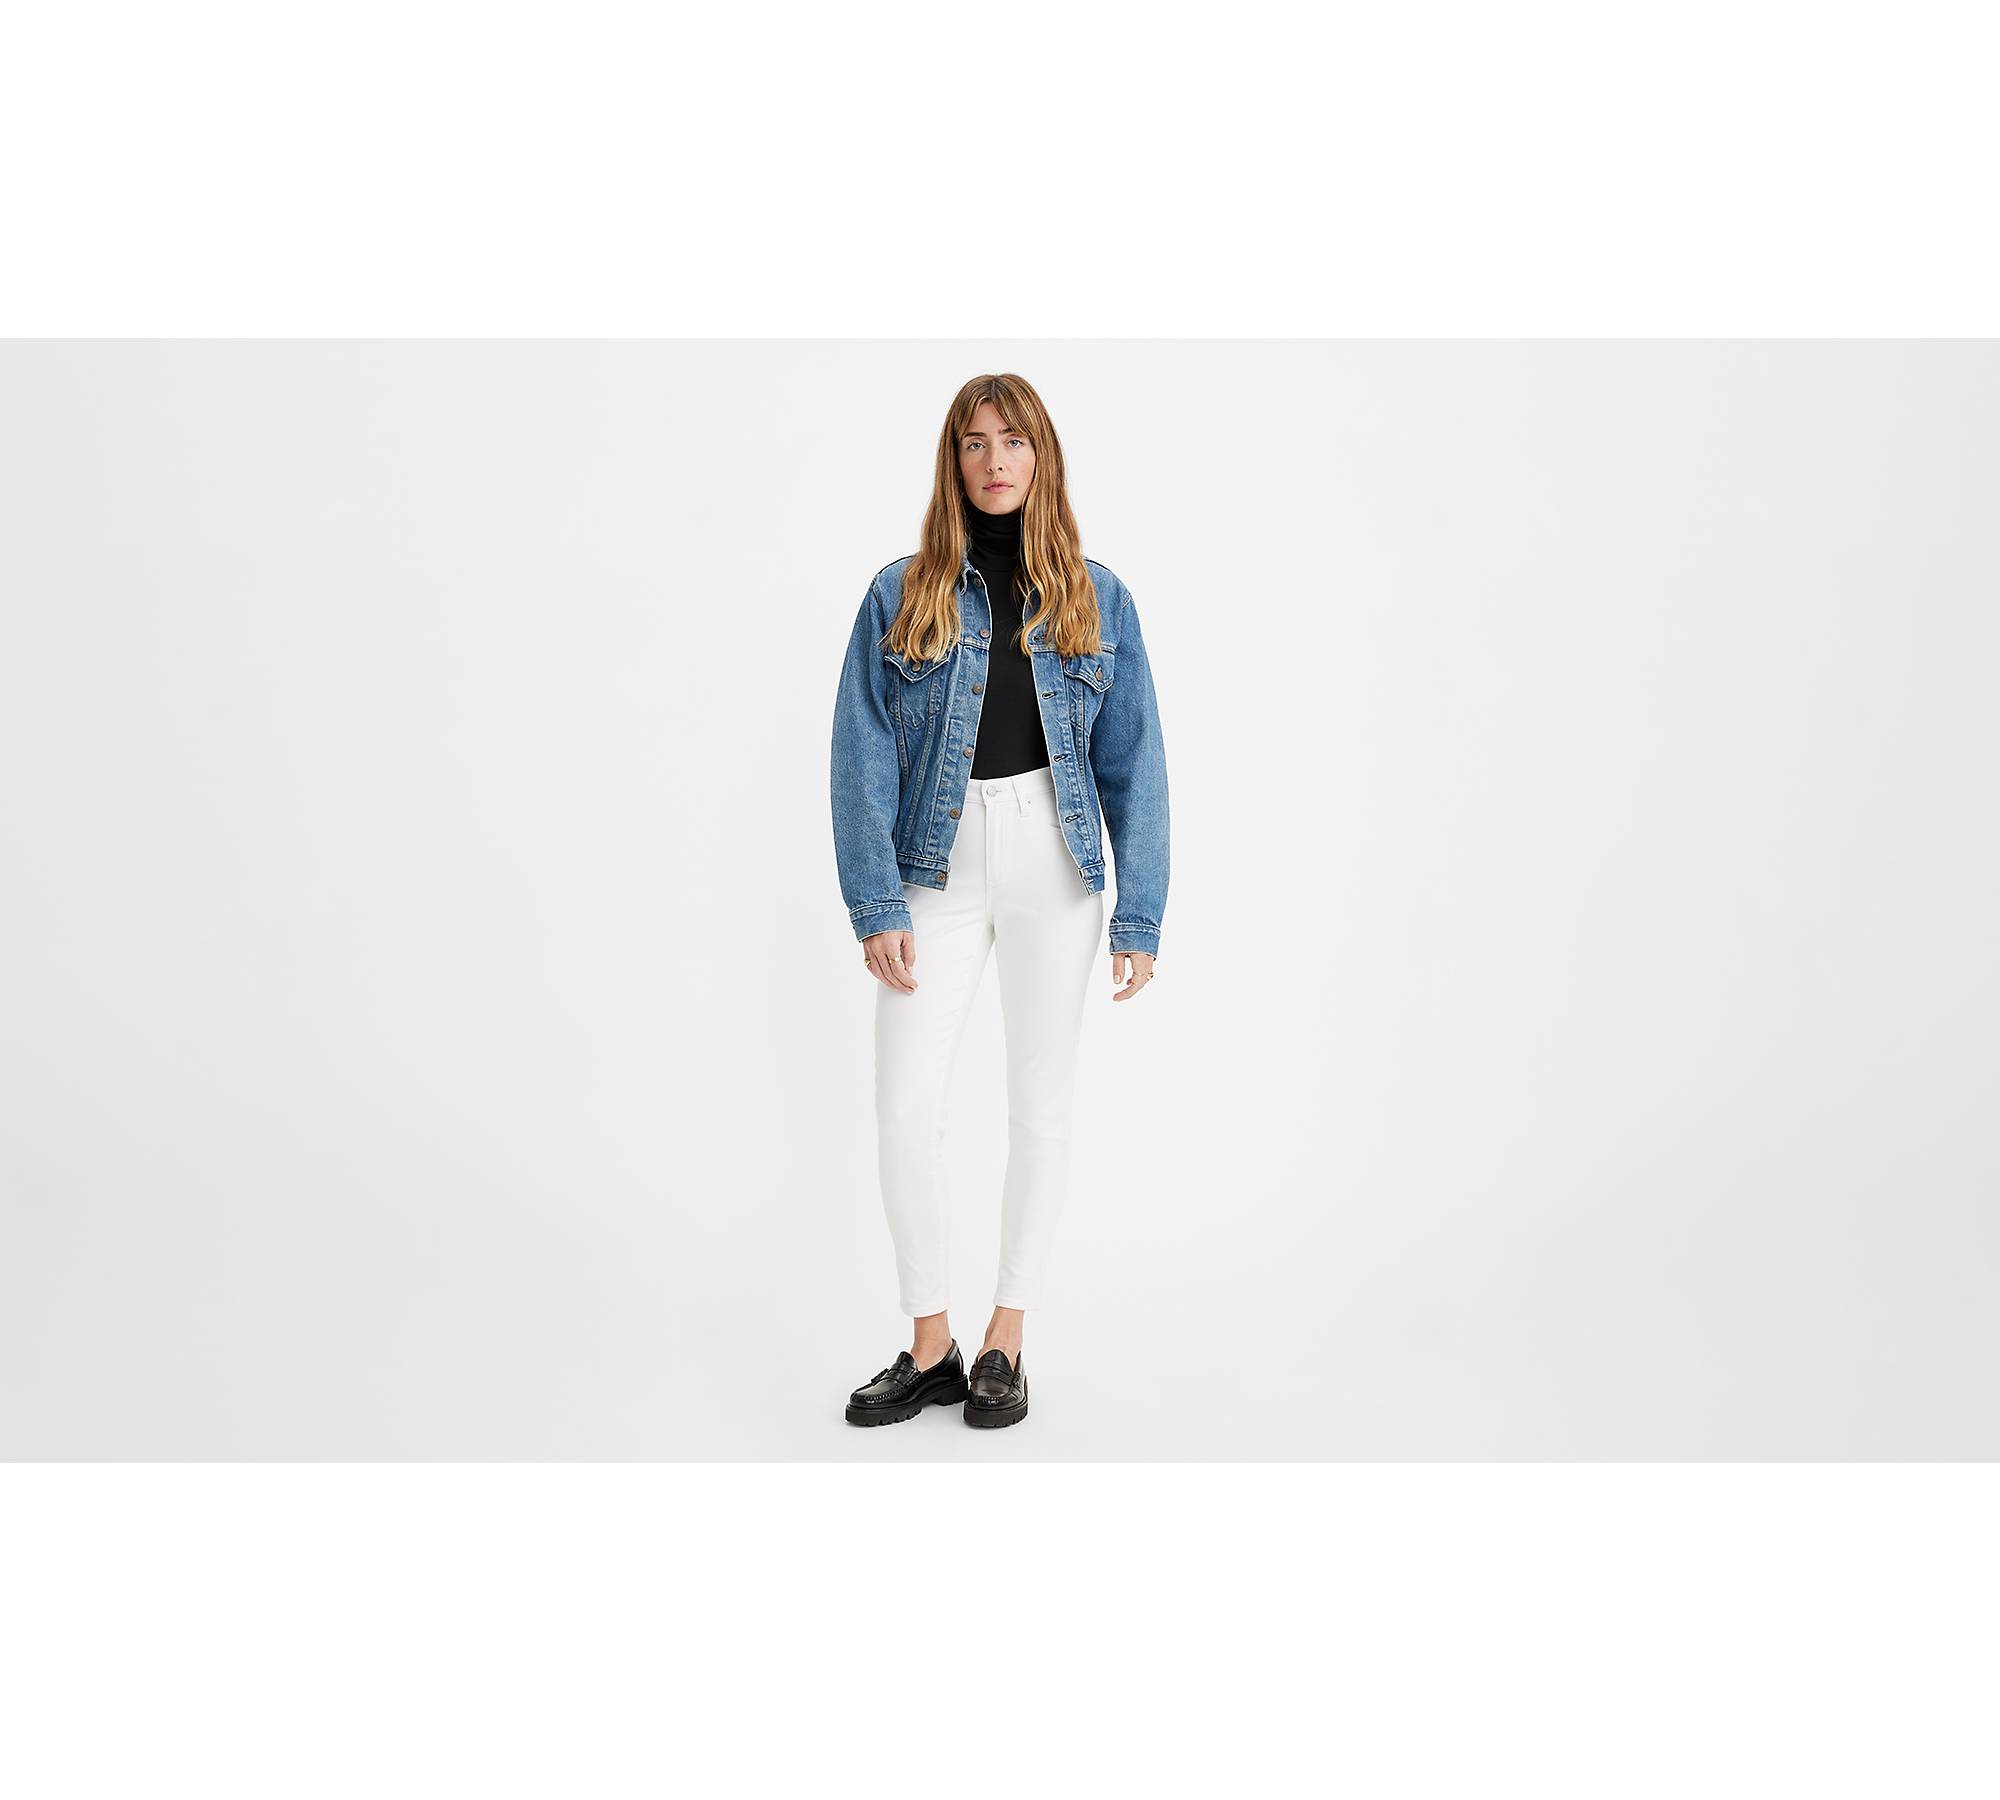 Women's White High-Waisted Jeans